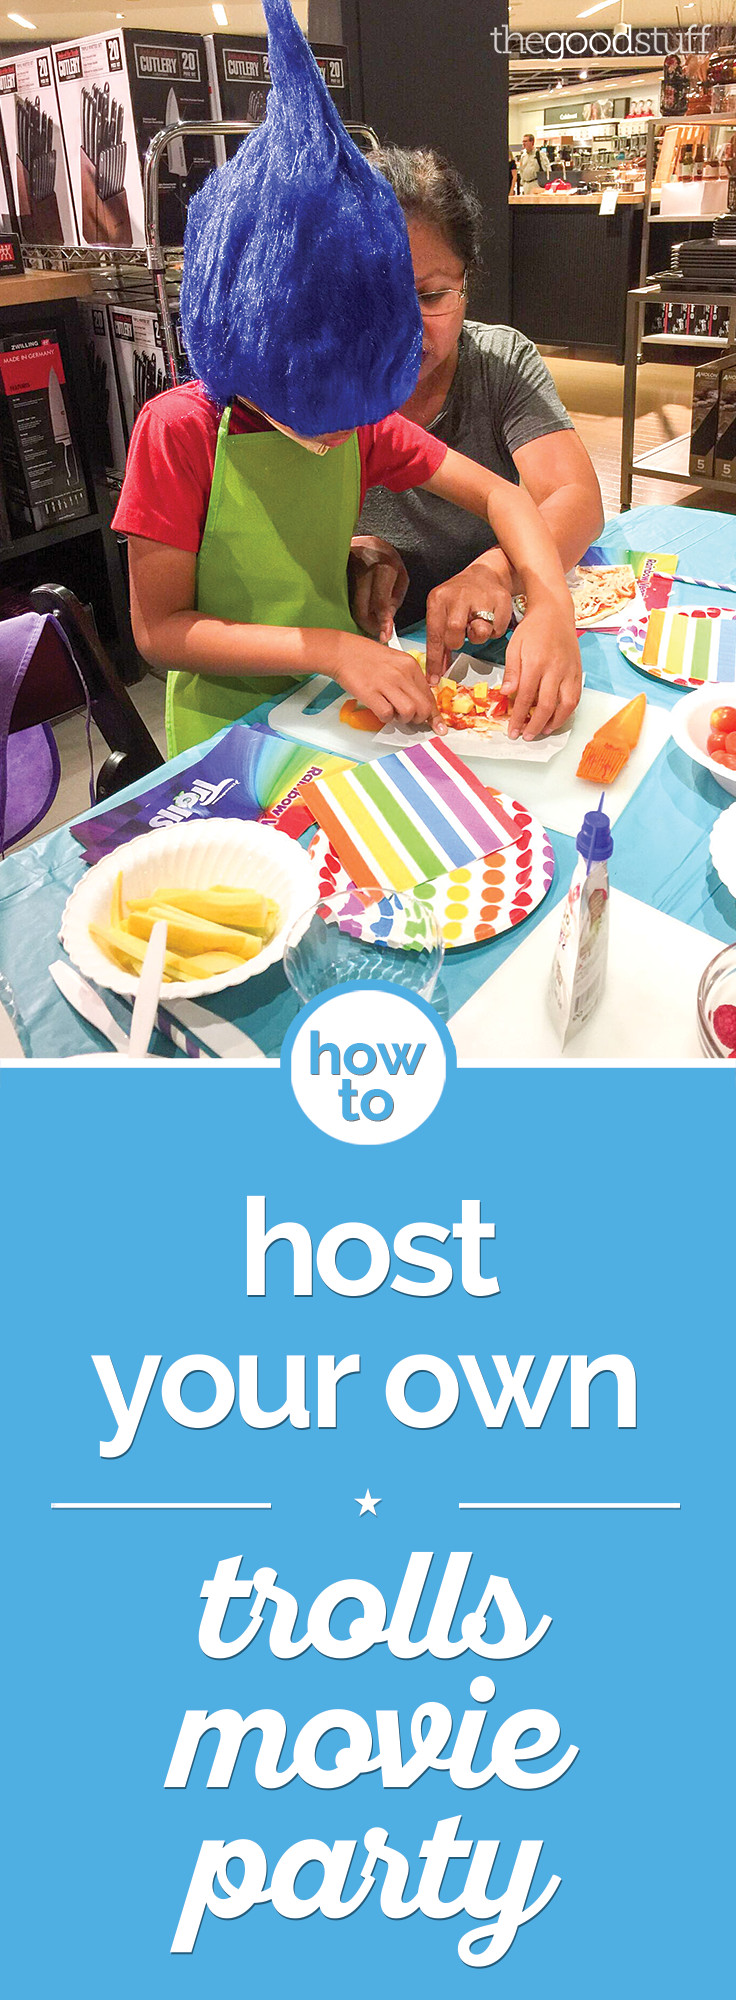 Fun Troll Movie Party Food Ideas
 How to Host Your Own Trolls Movie Party thegoodstuff